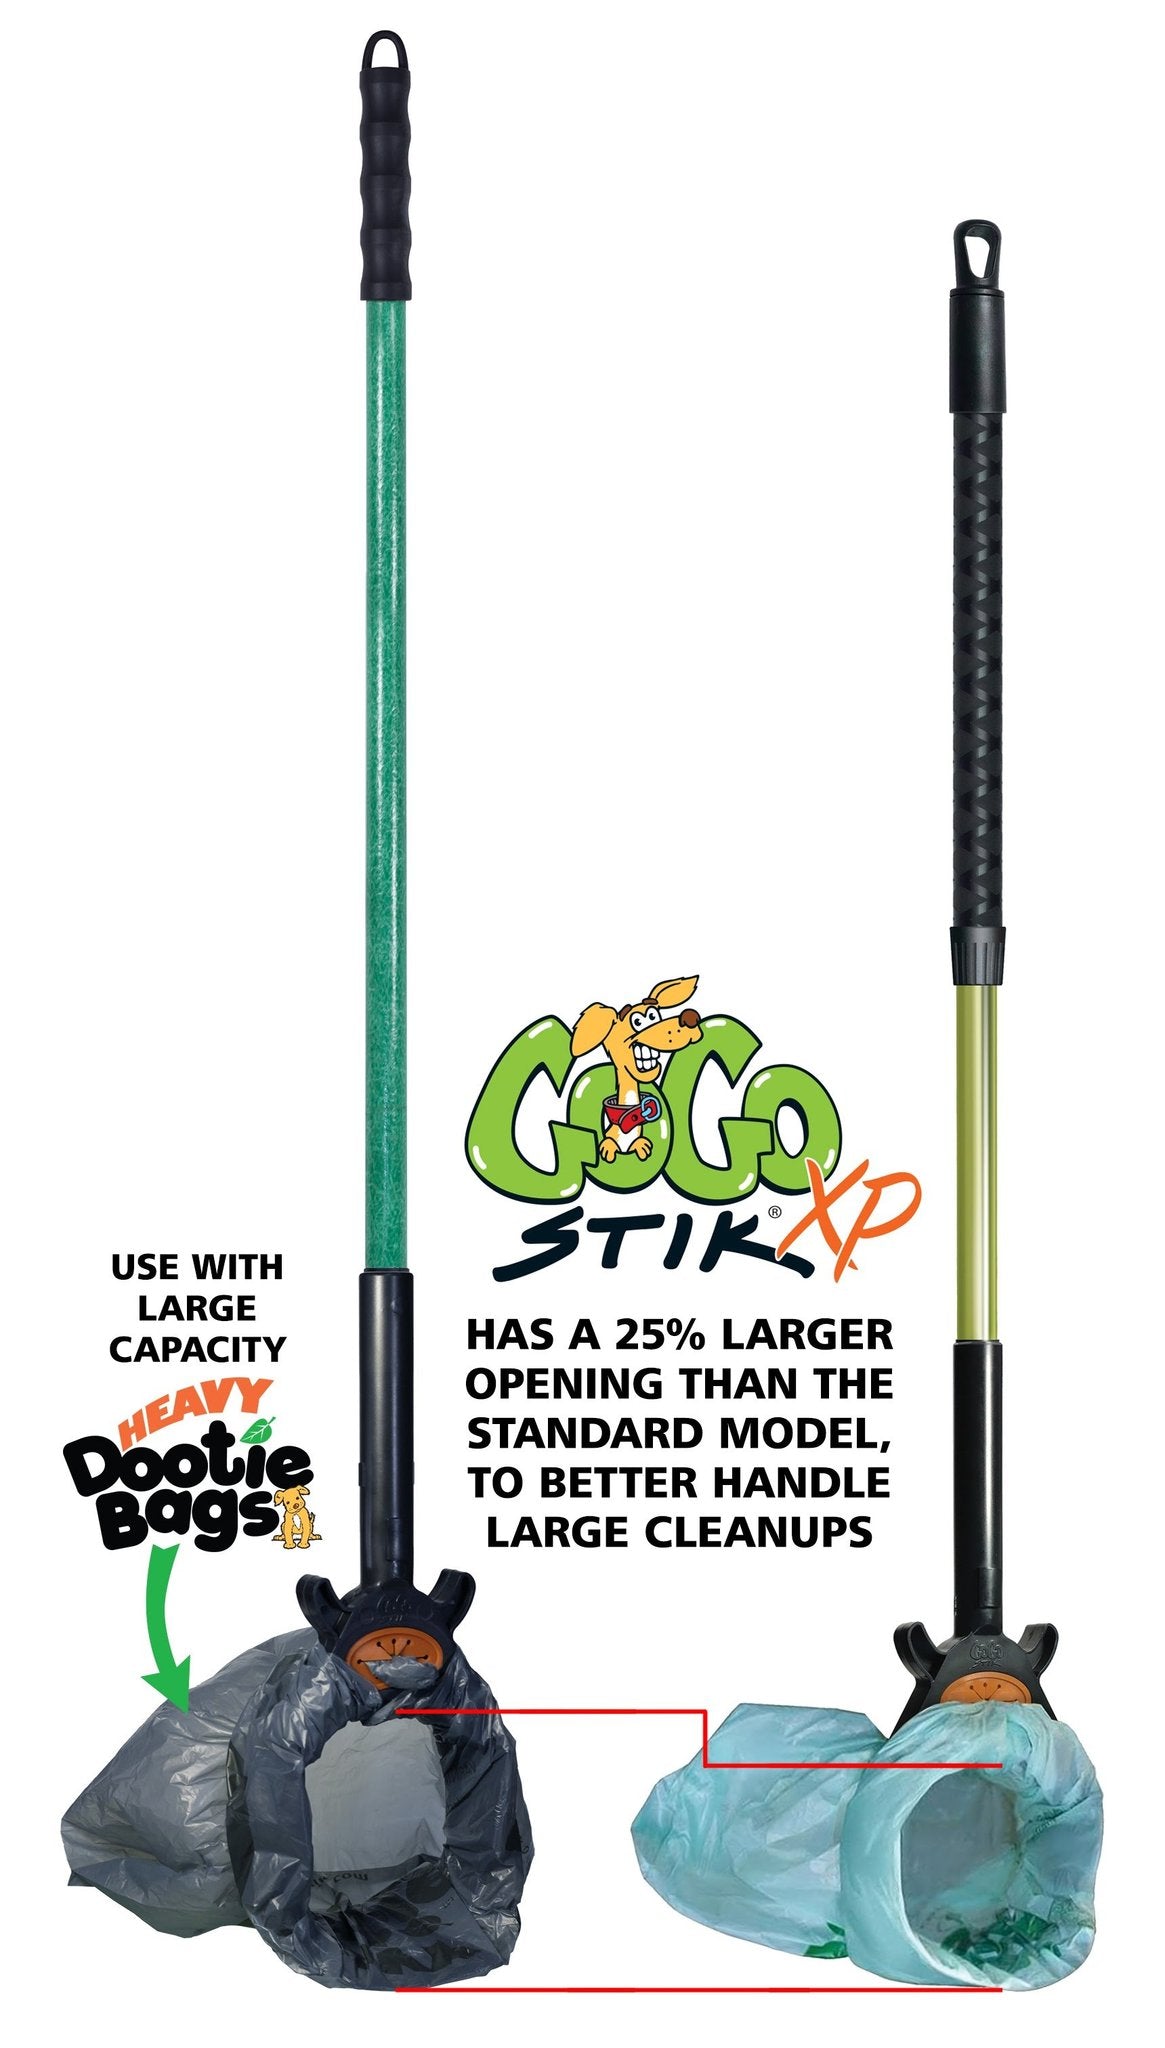 GoGo Stik® XP Pro - Totally Clean Pooper Scooper. Clean, Quick, And Convenient! Super Strong FRP Handle. Bags Keep Hands and Scooper Totally Clean.